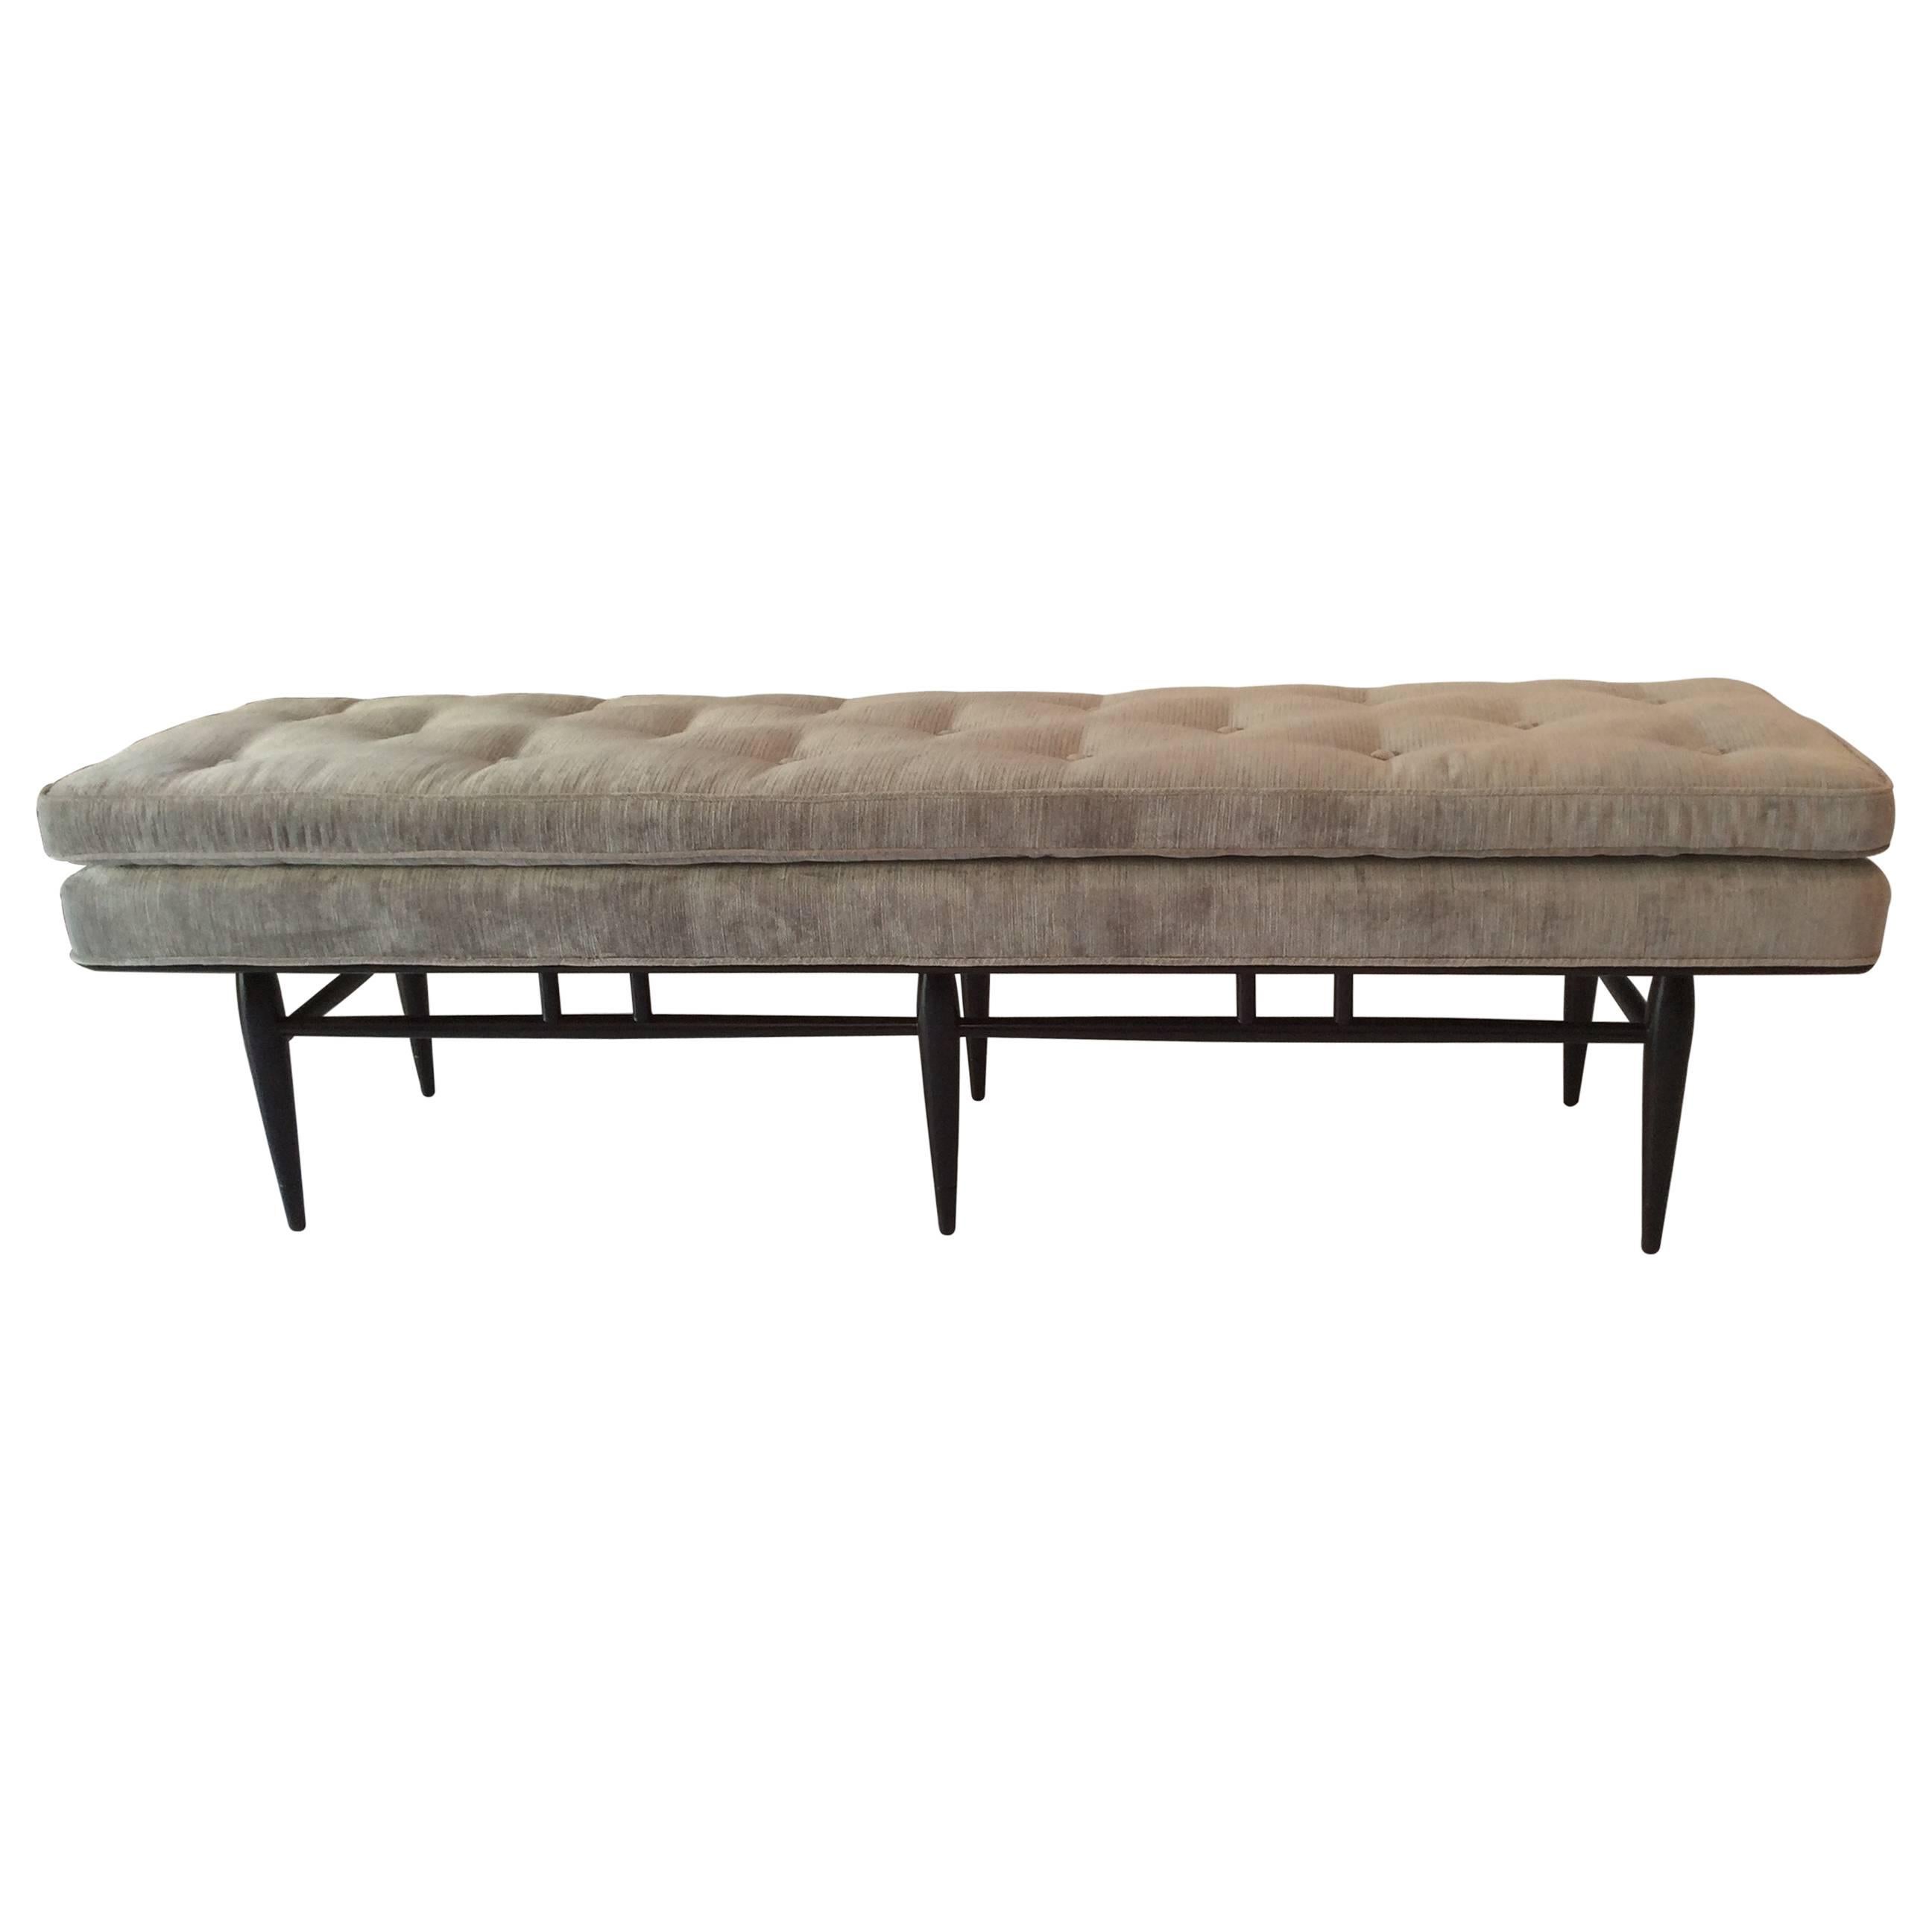 Hard to find long button tufted Mid-Century bench. Newly re-upholstered in silver gray velvet fabric by Romo. Walnut frame newly refinished in rich chocolate brown stain. Great in an entry way or at the foot of a bed.